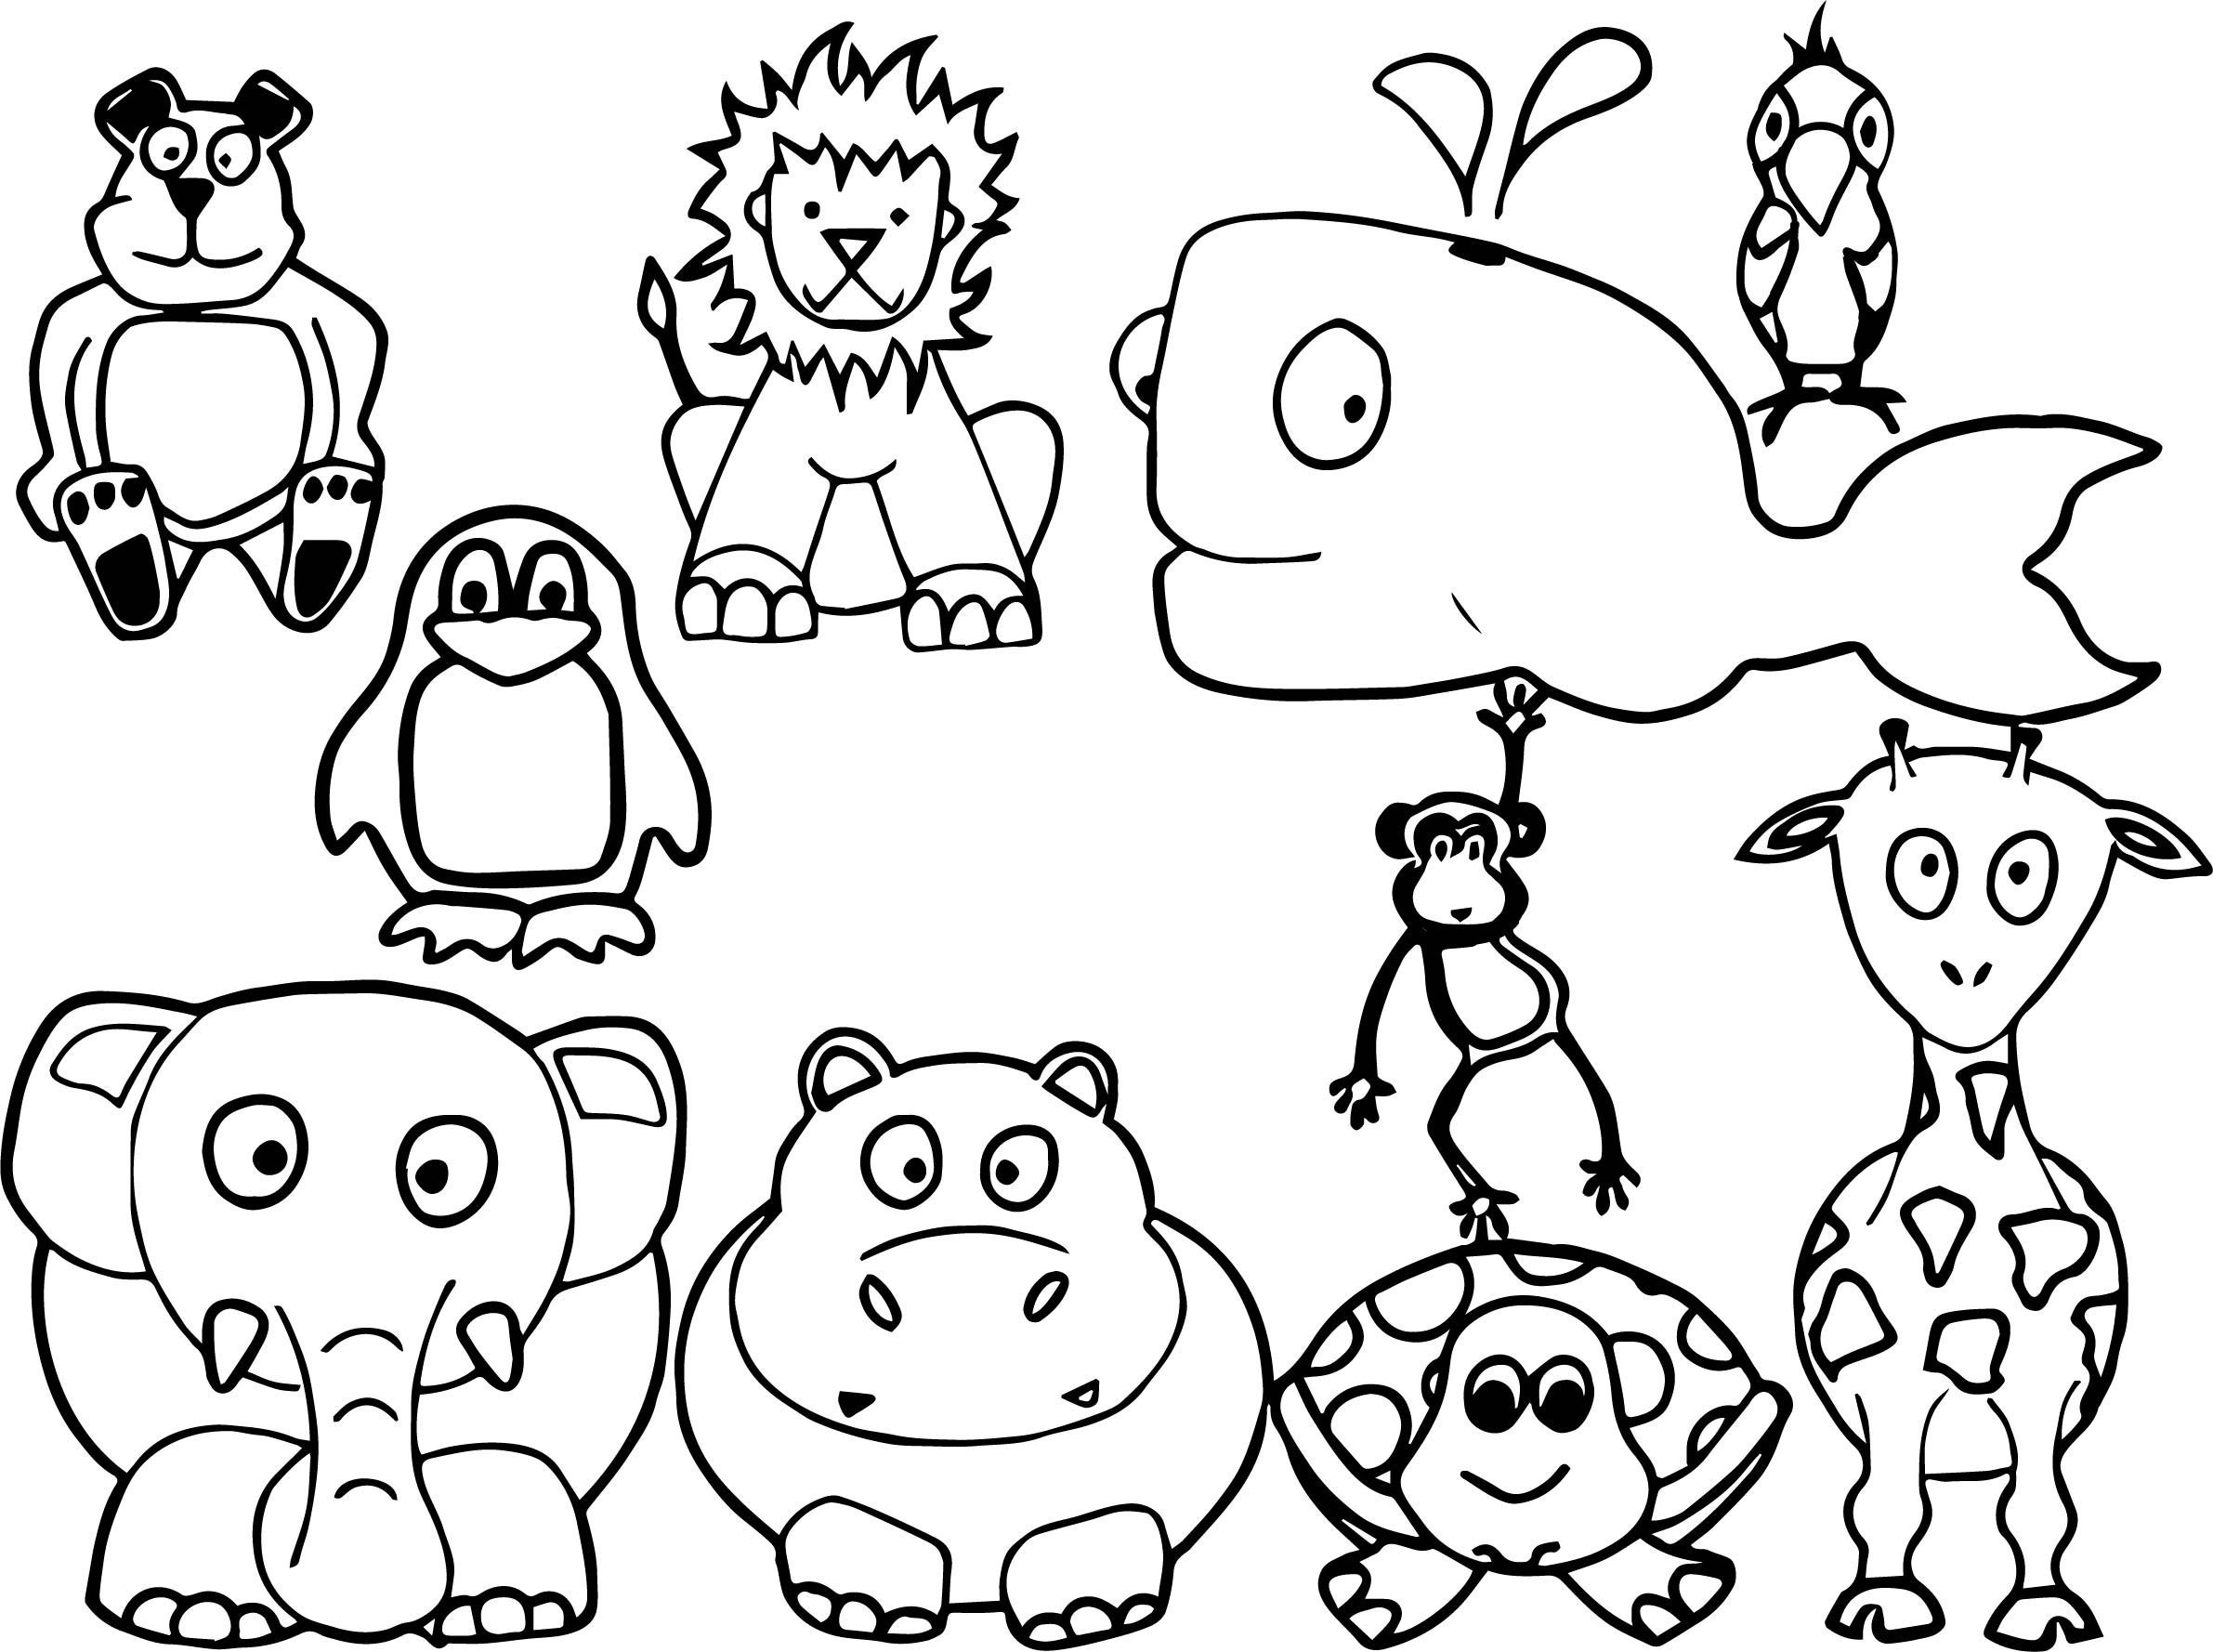 Printable Coloring Pages For Kids Animals
 Animal Coloring Pages Best Coloring Pages For Kids